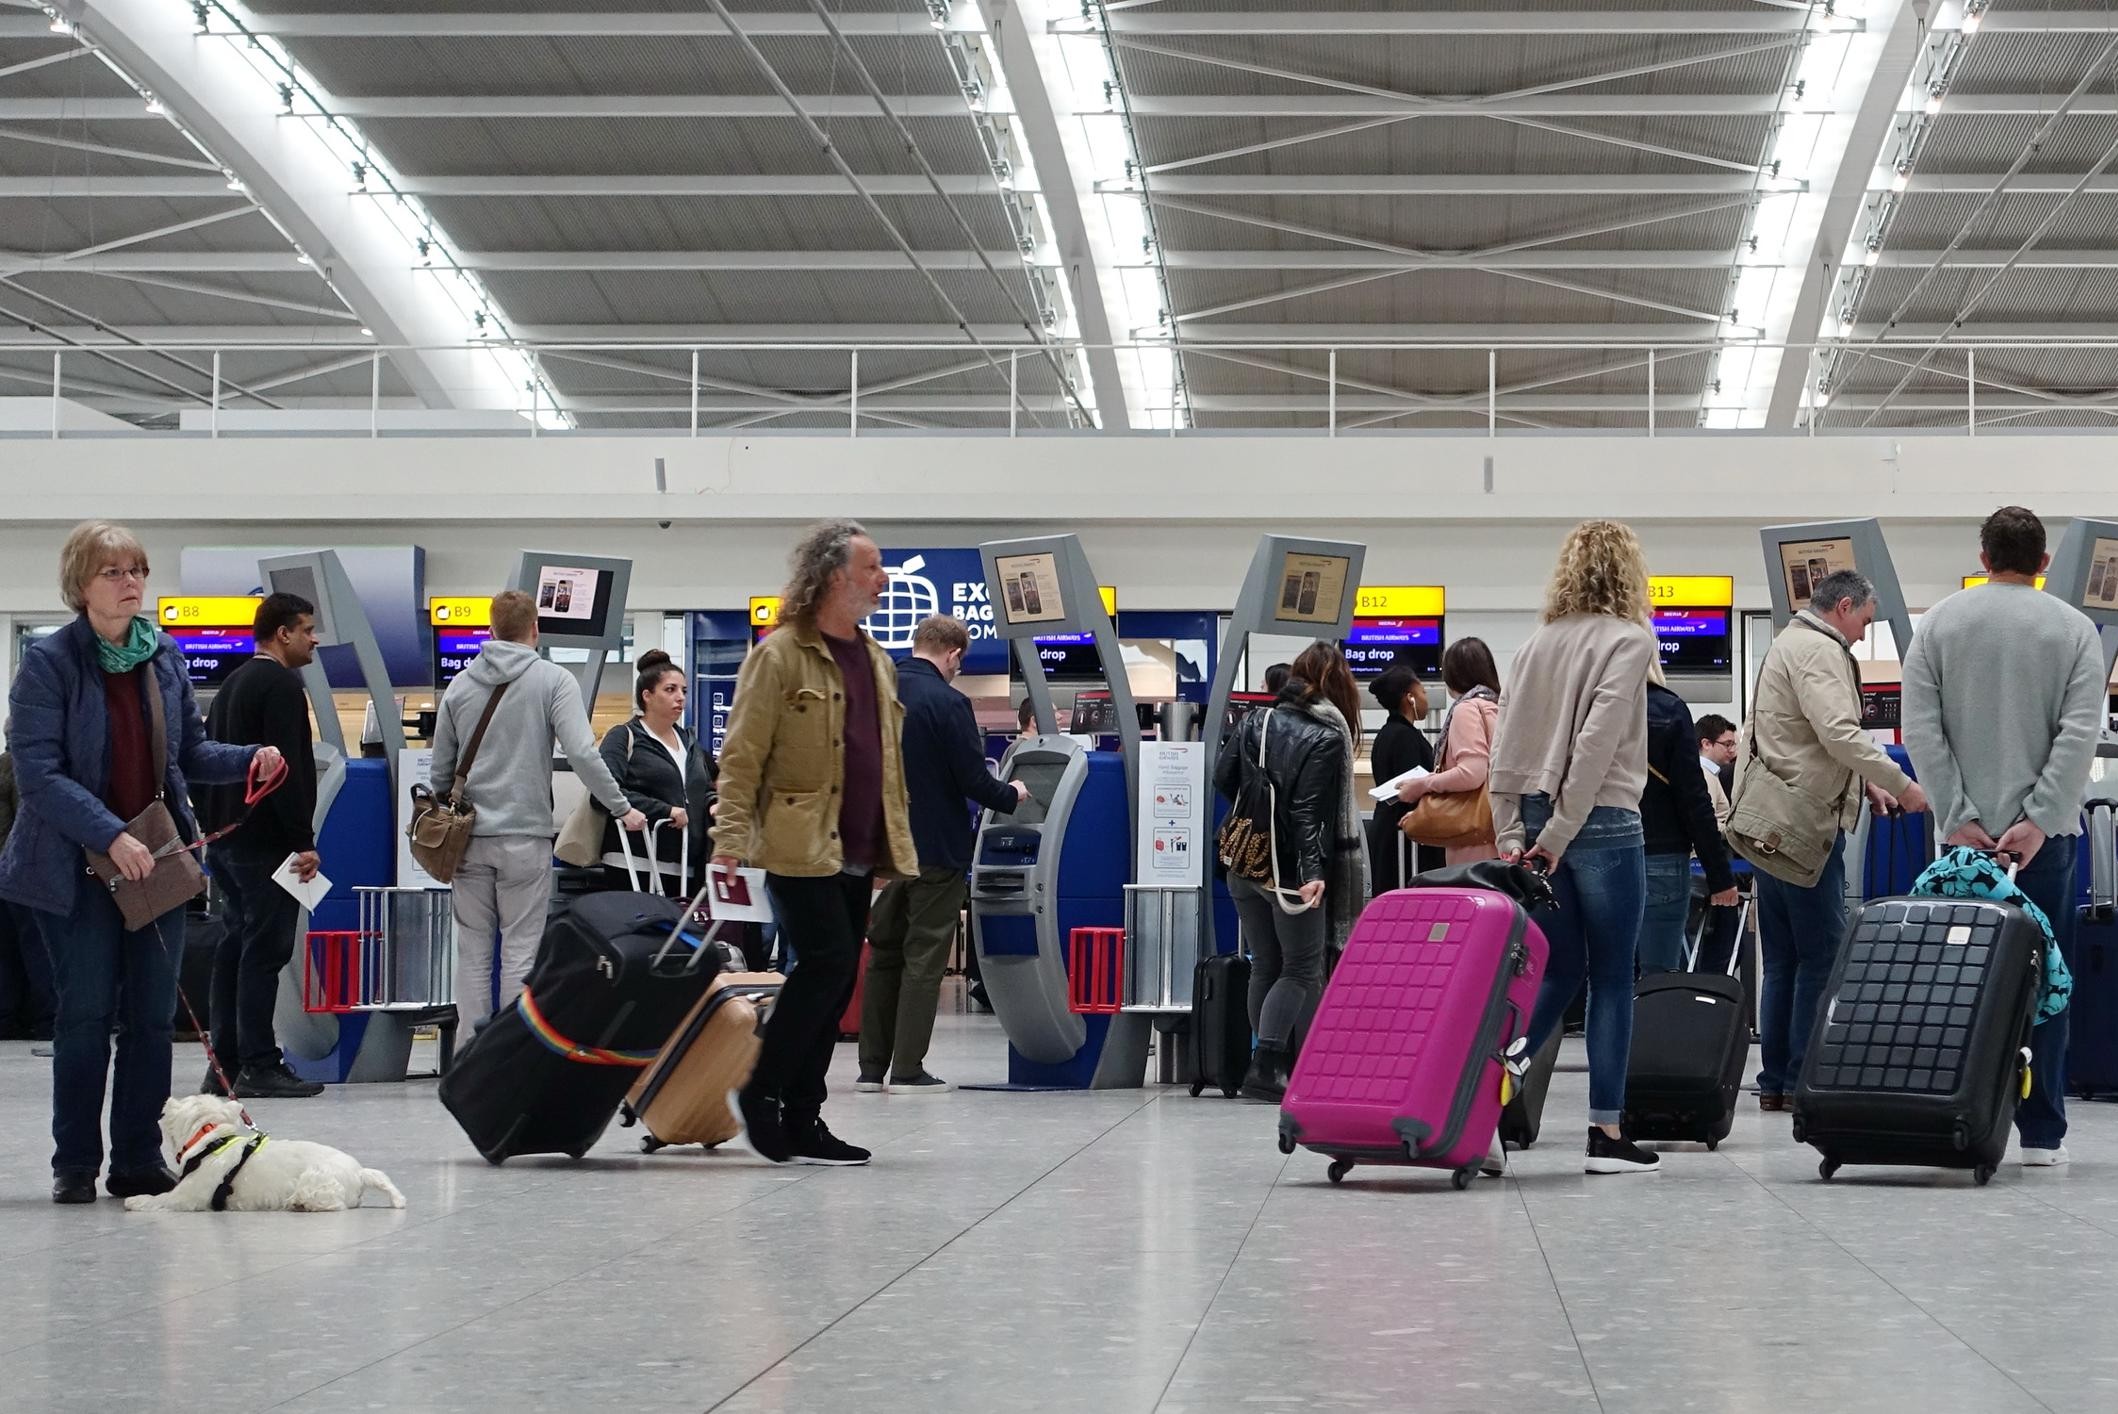 “At least 15,000 Britons stranded abroad due to cancellations”